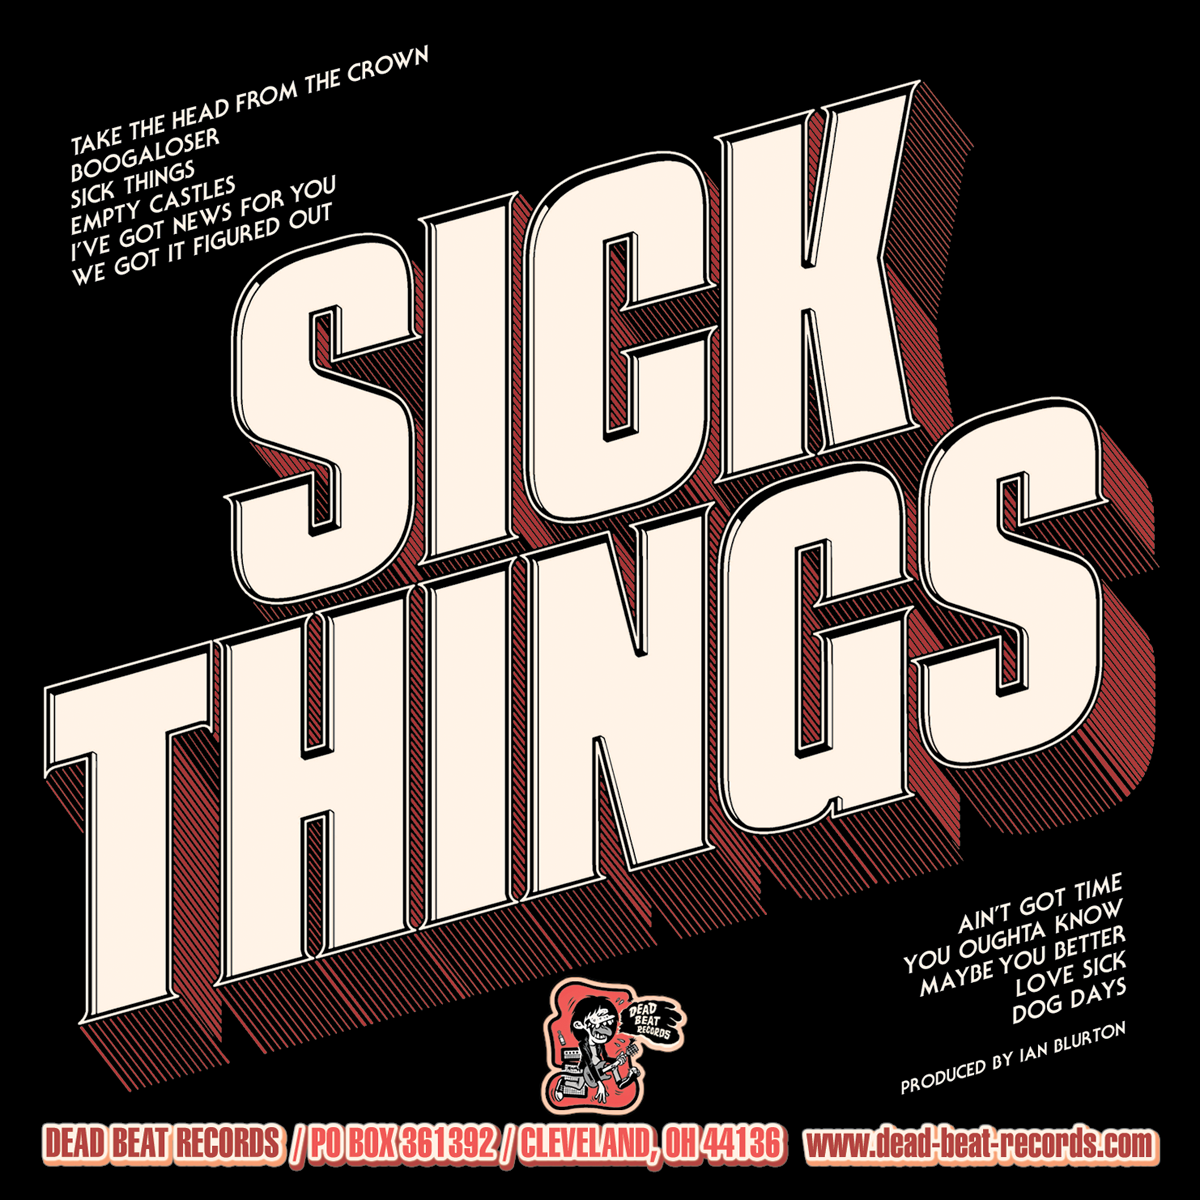 Sick Things- S/T CD ~HELLACOPTERS / KILLER!